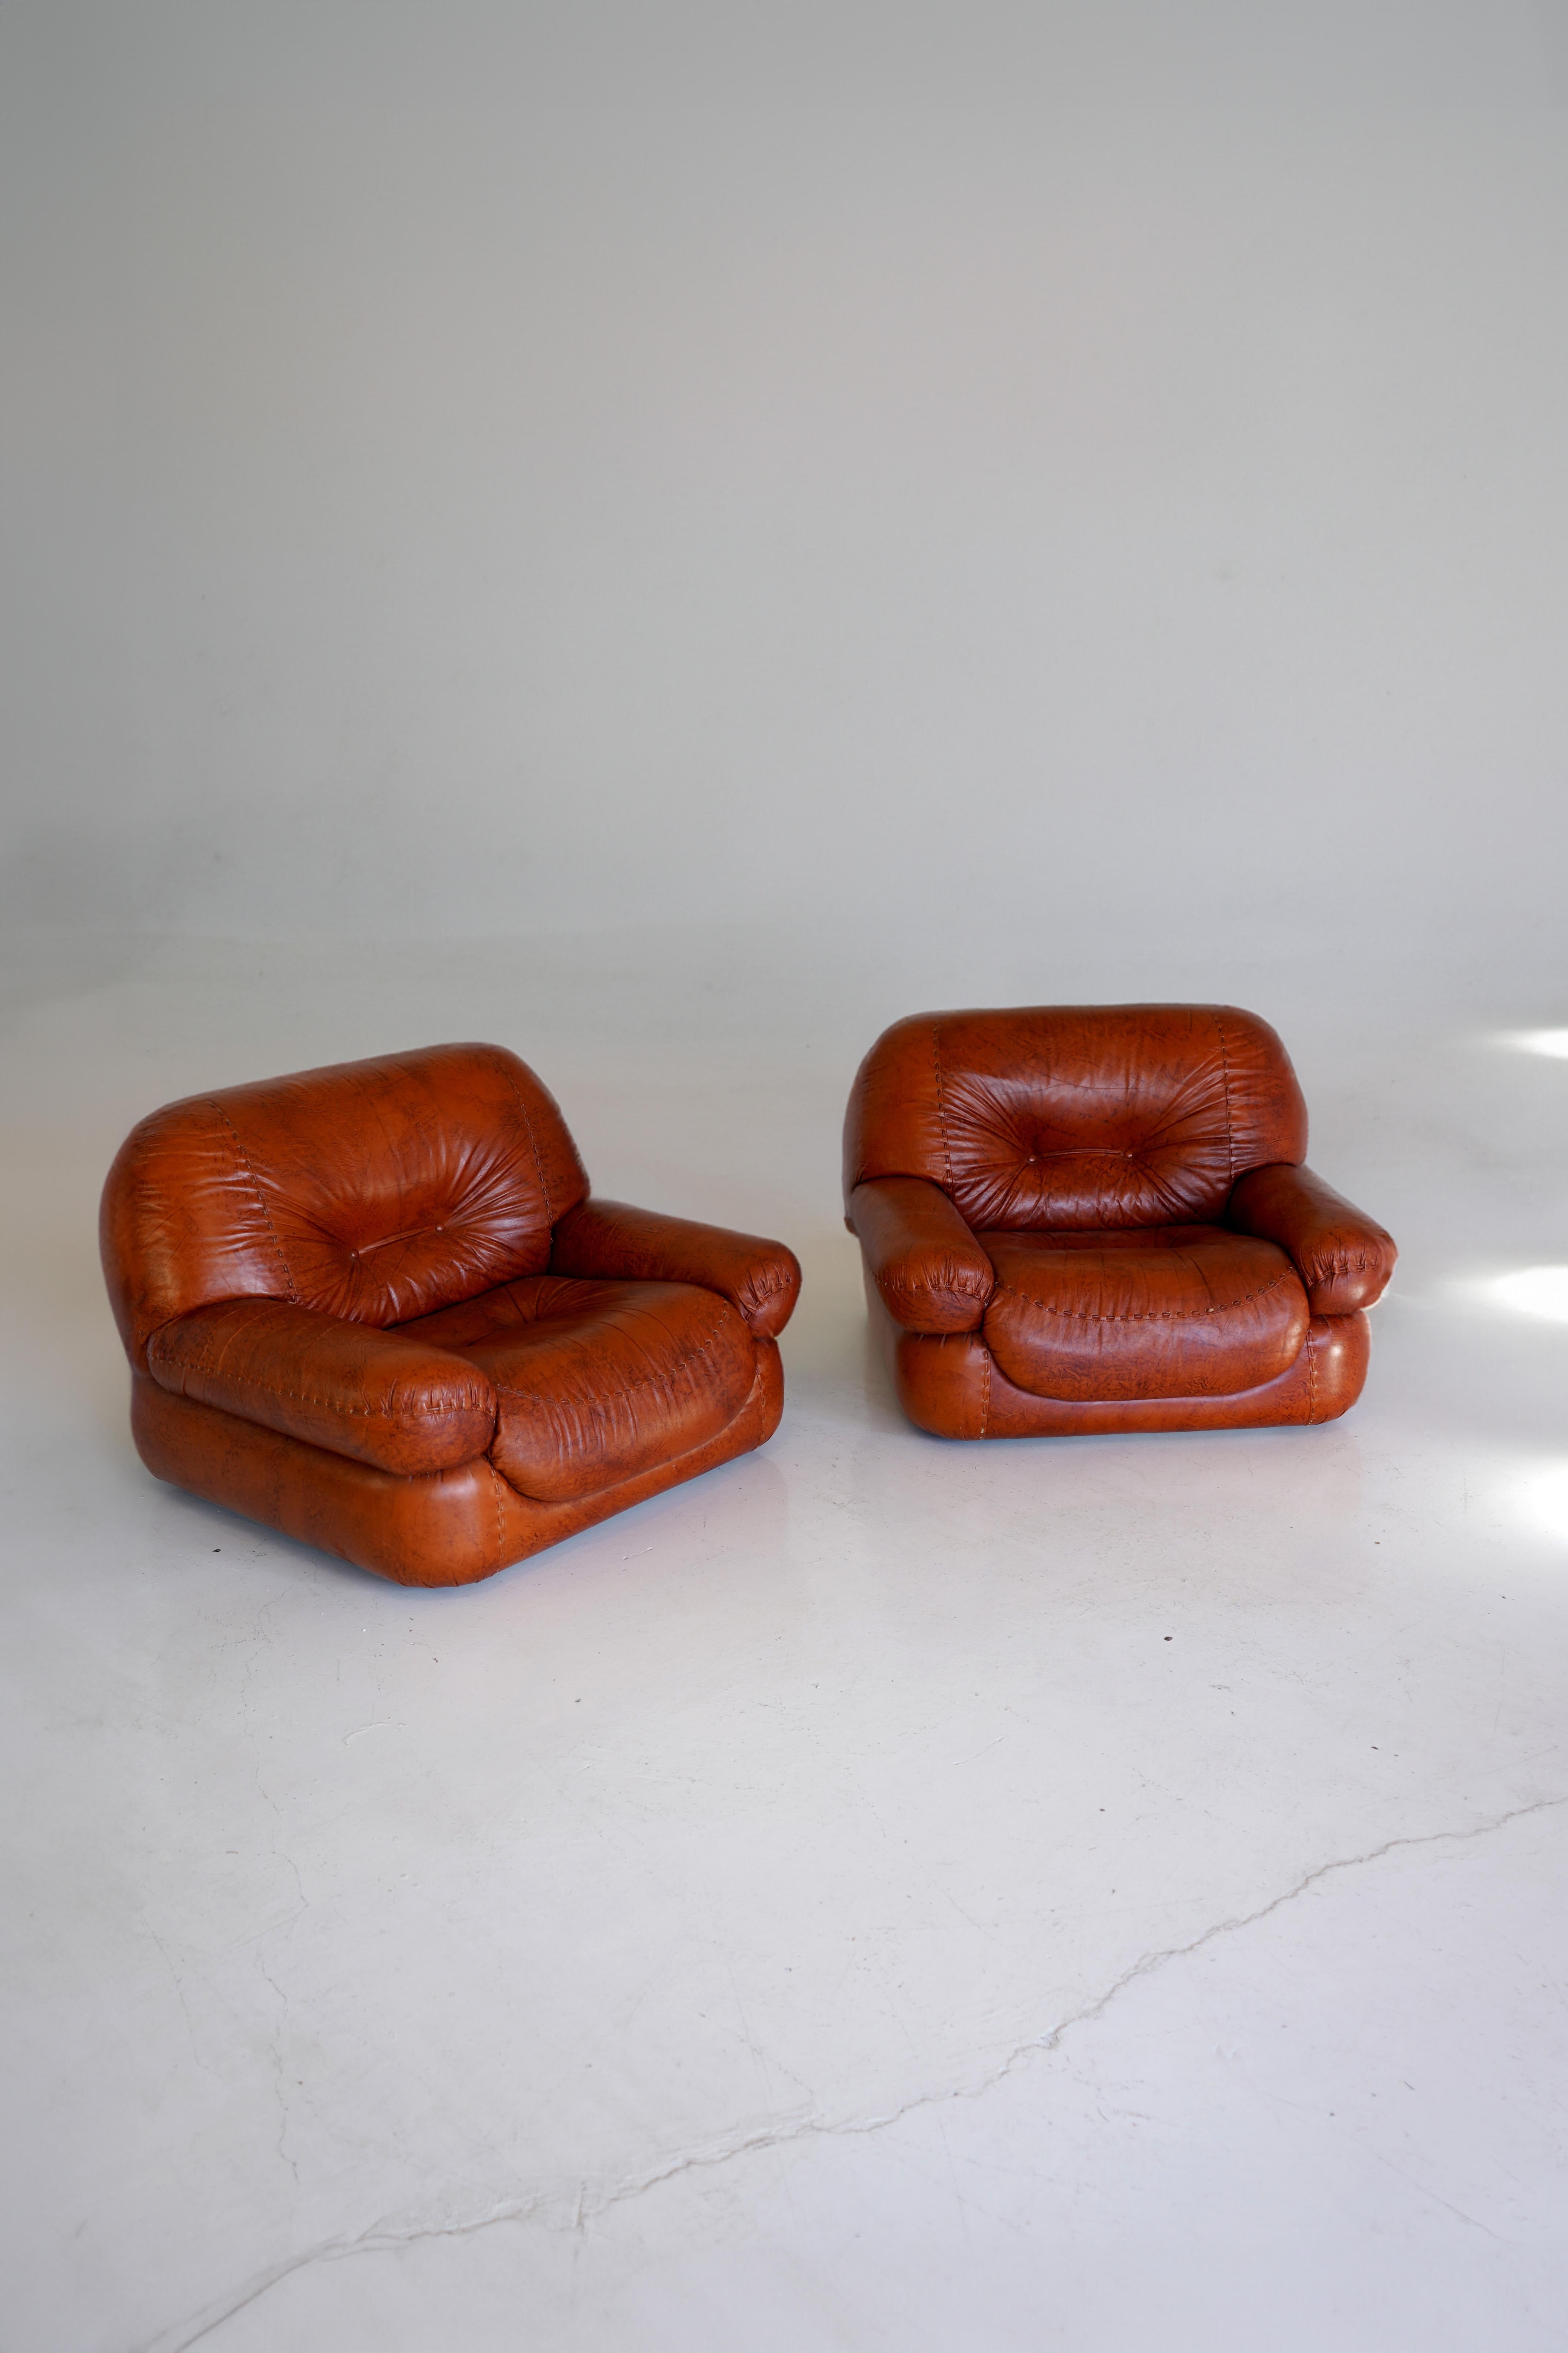 Pair of patinated cognac leather Sapporo armchairs for Mobil Girgi. Made in Italy, 1970s. Priced as a pair.

Very good vintage condition.